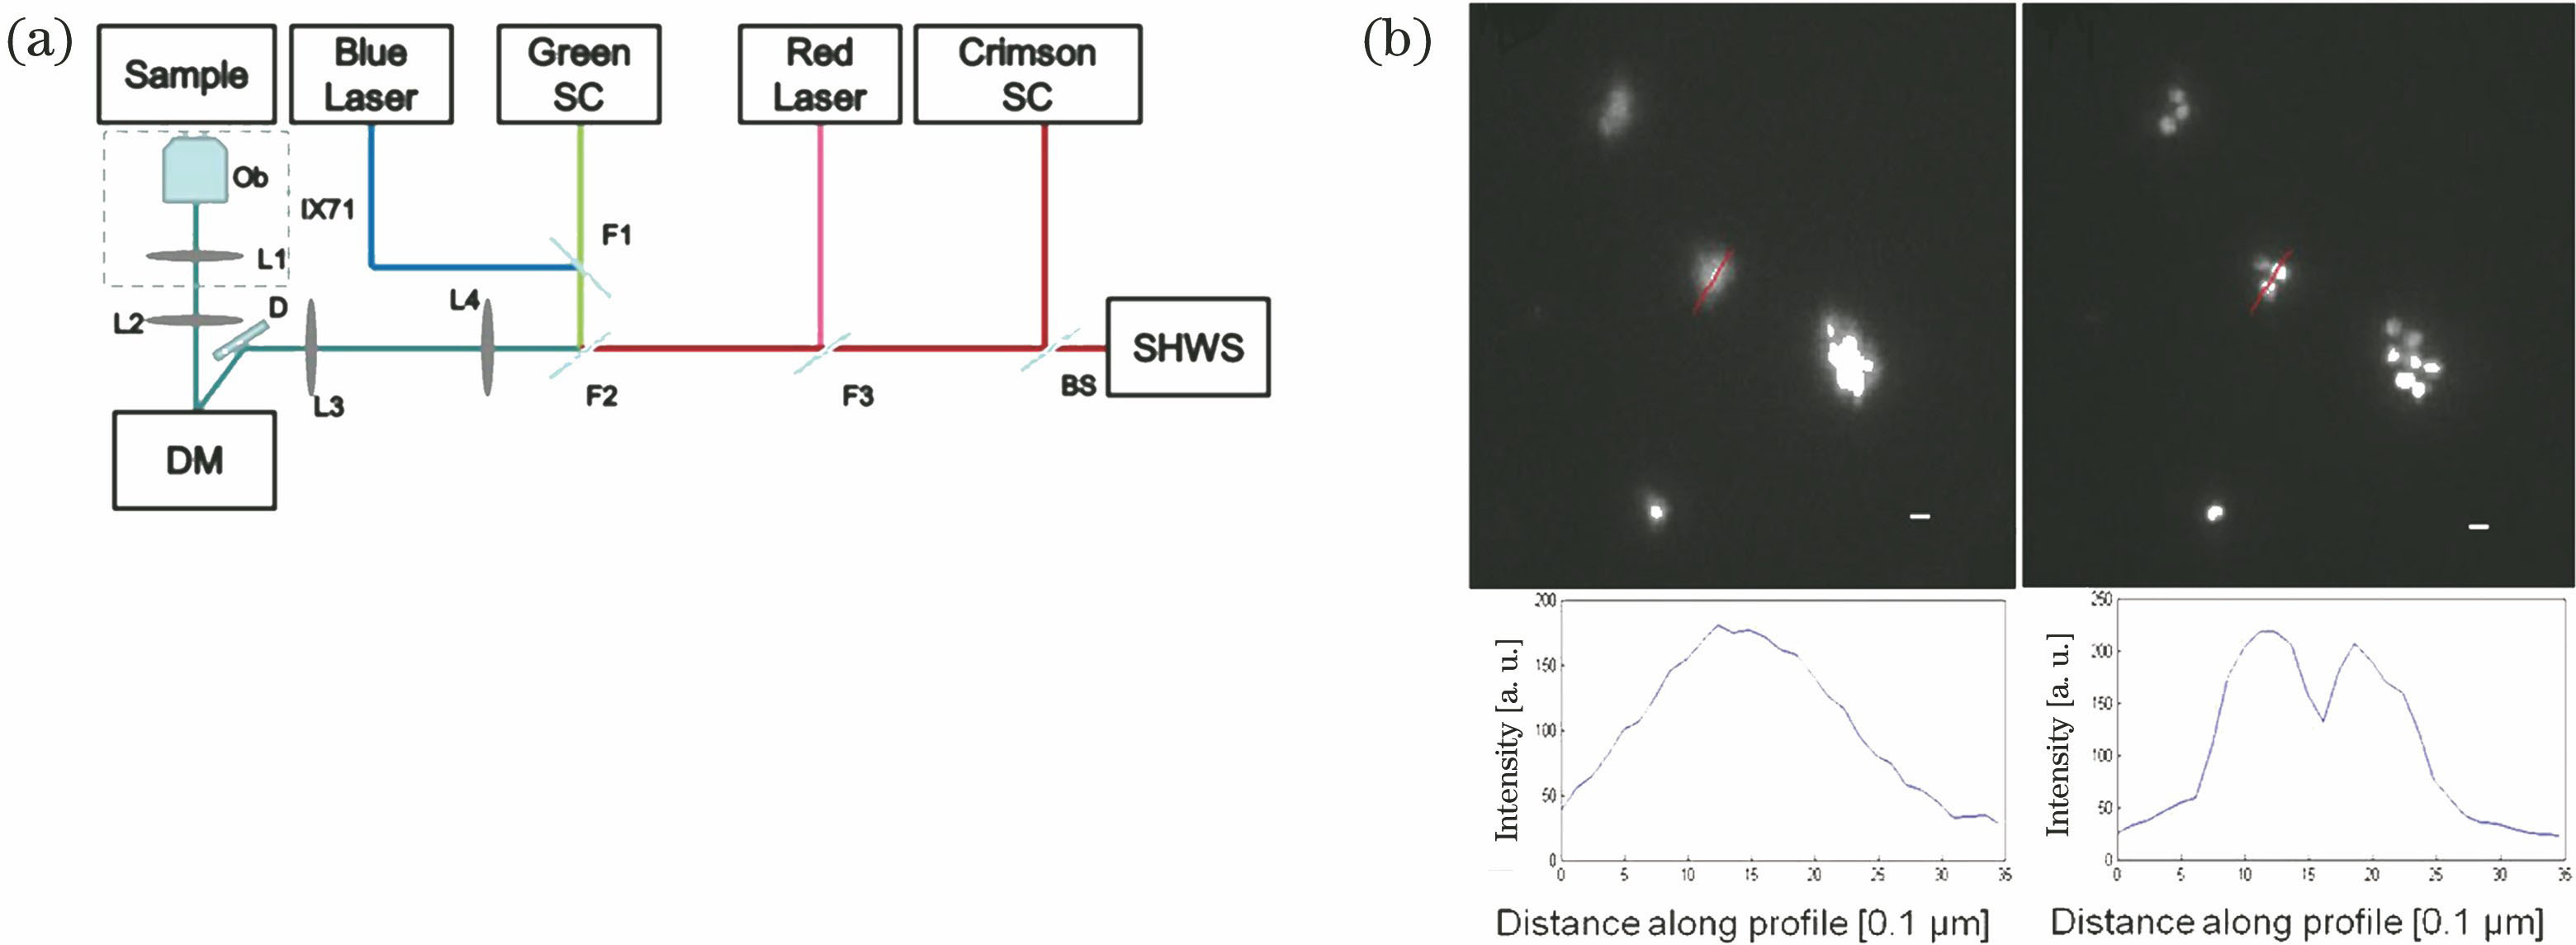 AO wide-field microscope system and comparison of wide-field images before and after AO correction[23]. (a) Schematic of AO wide-field microscope system based on SHWS, fluorescent beads, and DM; (b) wide-field images of green fluorescent beads before and after AO correction